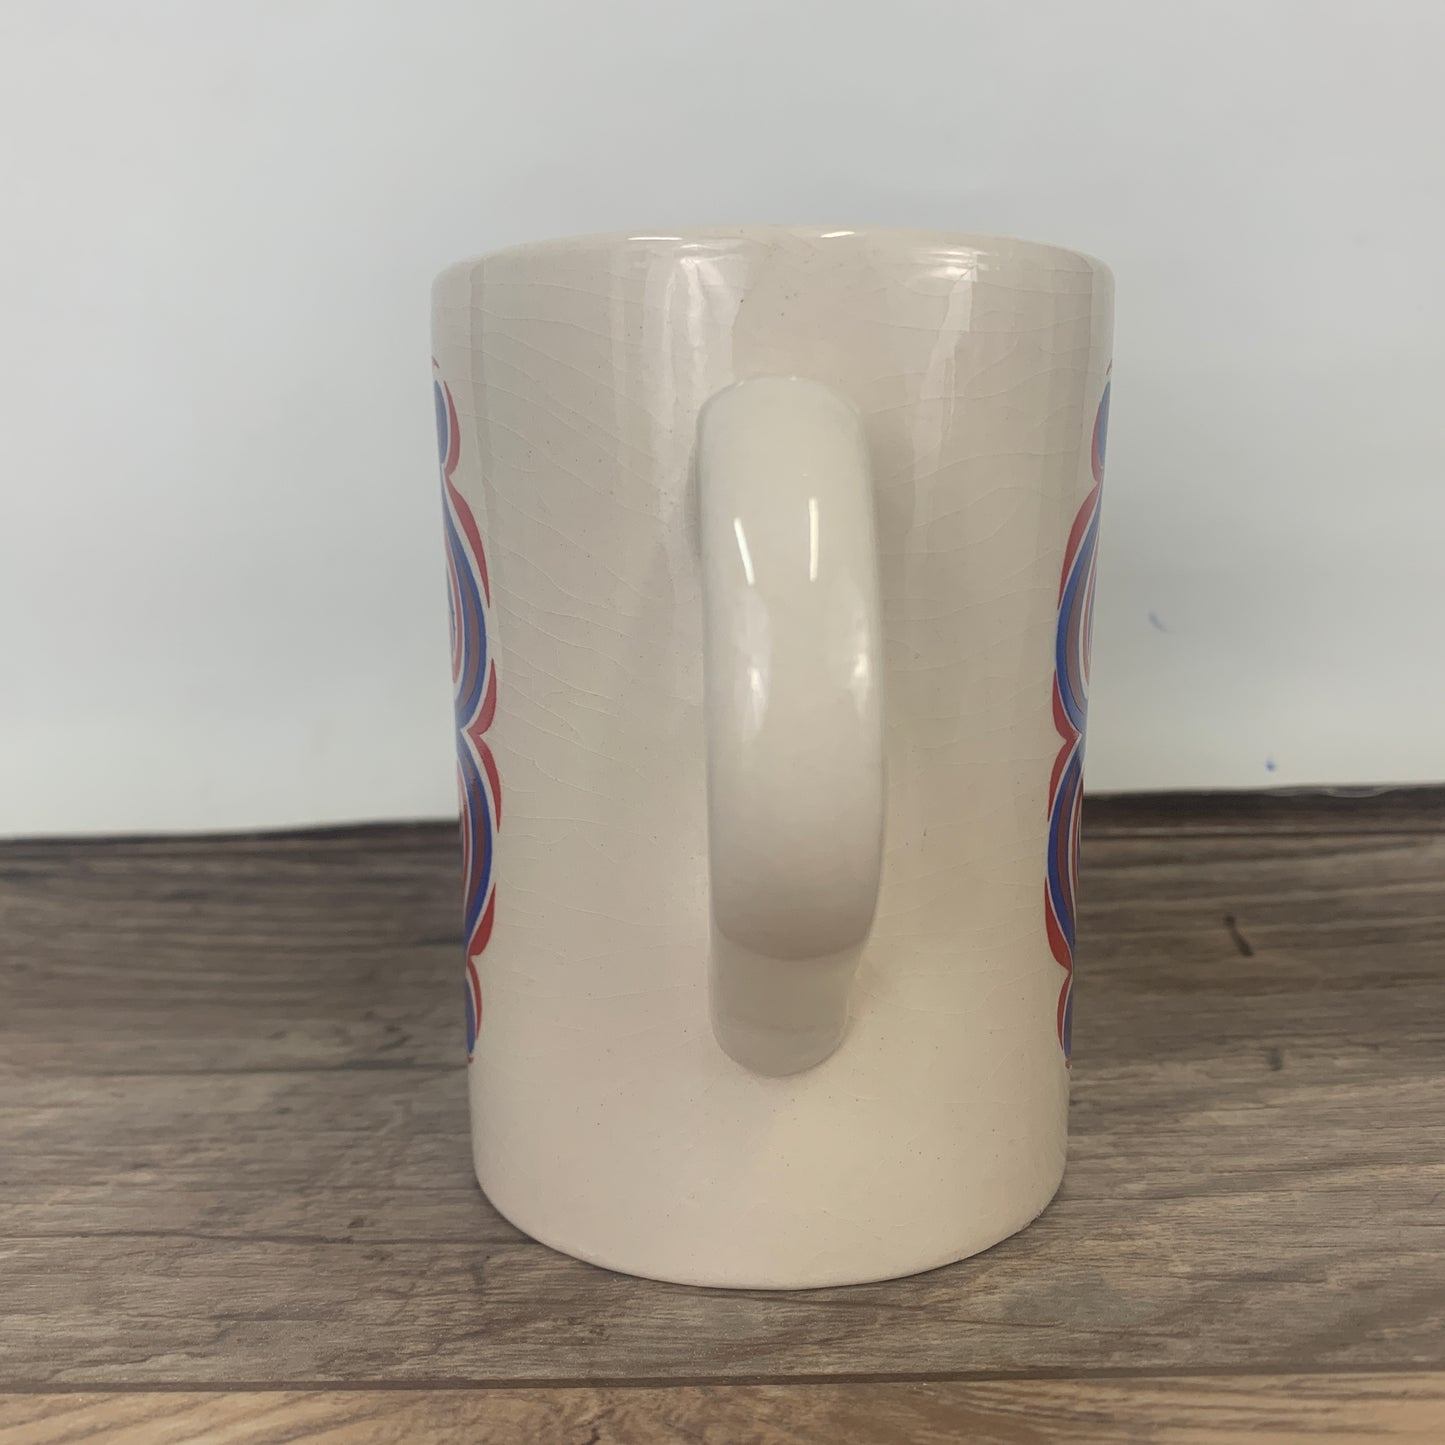 Staffordshire Potteries Tall Coffee Mug with Red and Blue Design